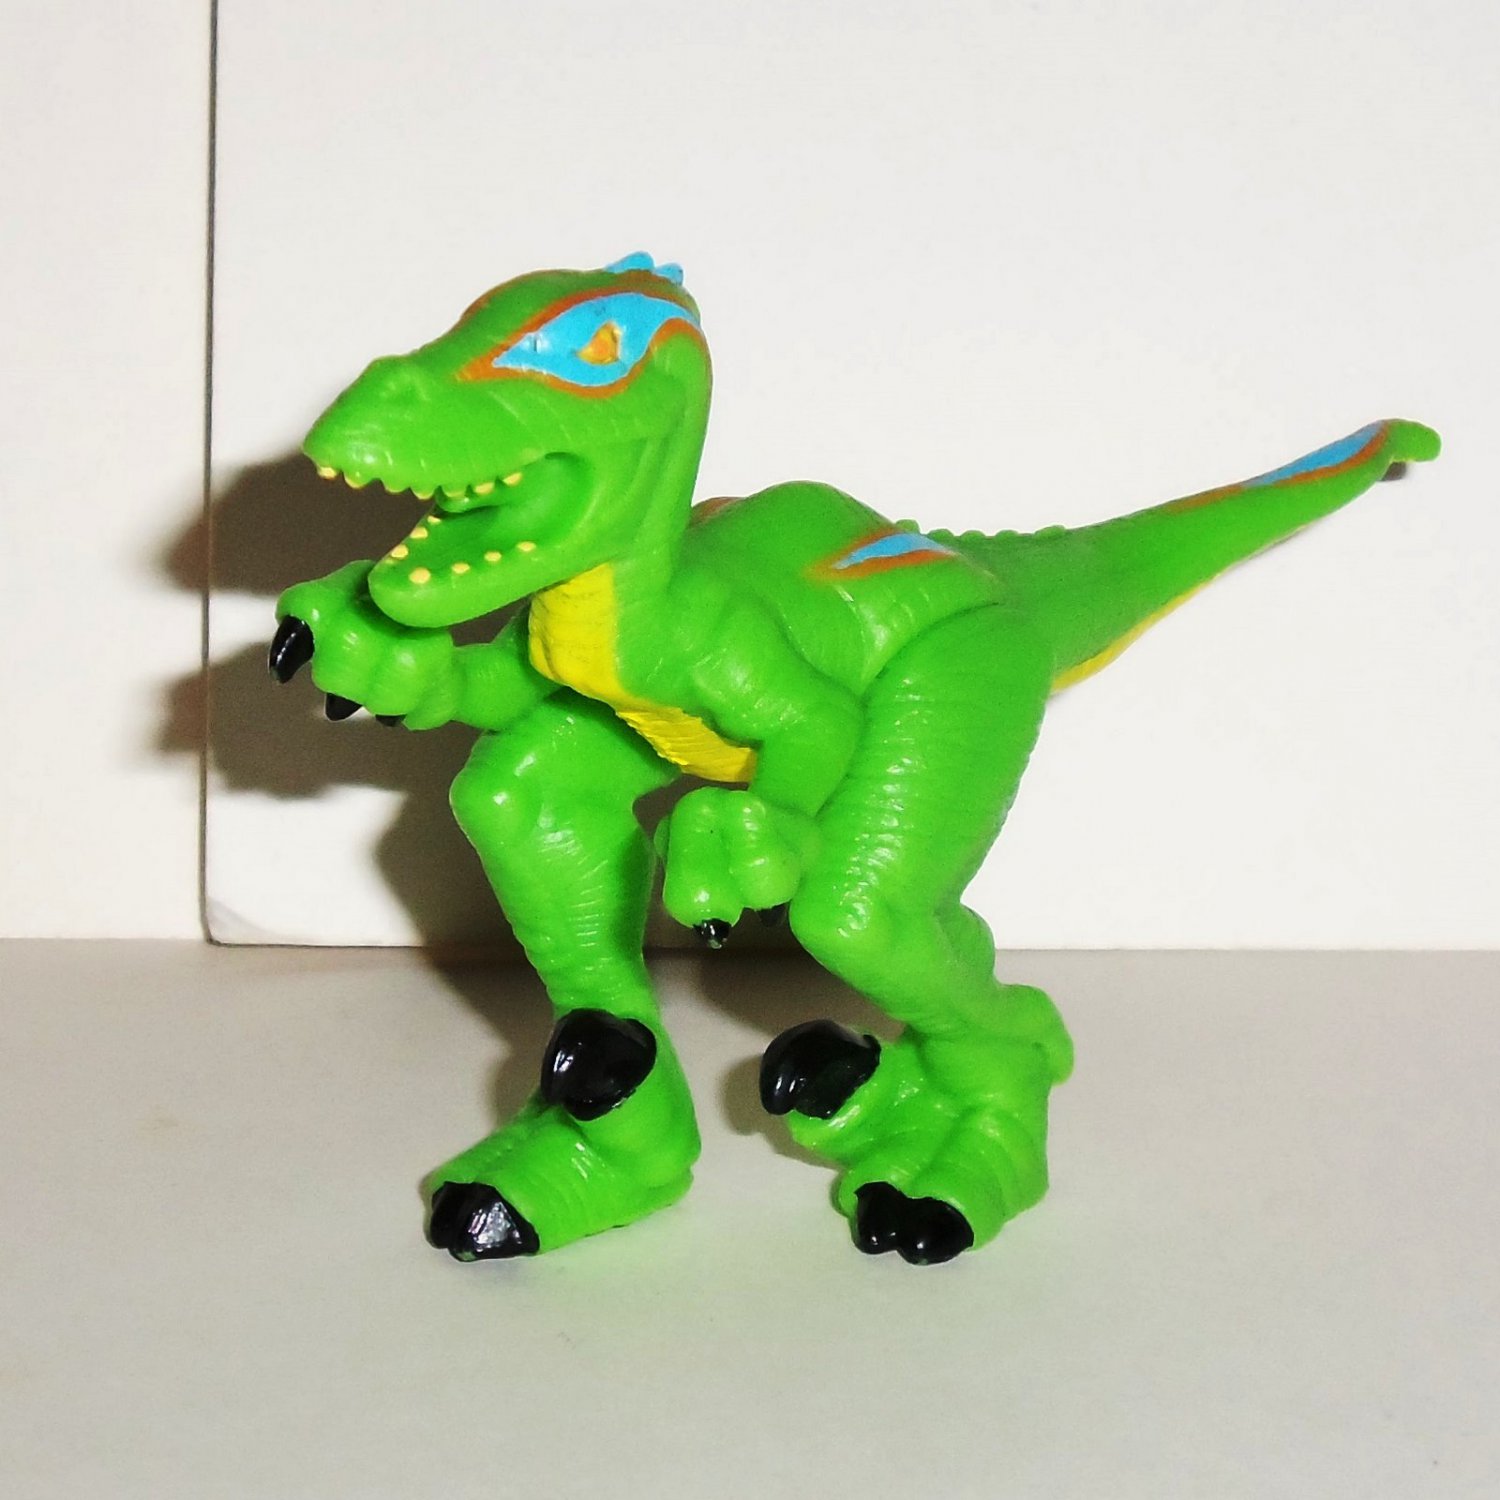 Fisher-Price Imaginext Green Shreds the Raptor Dinosaur Loose Used